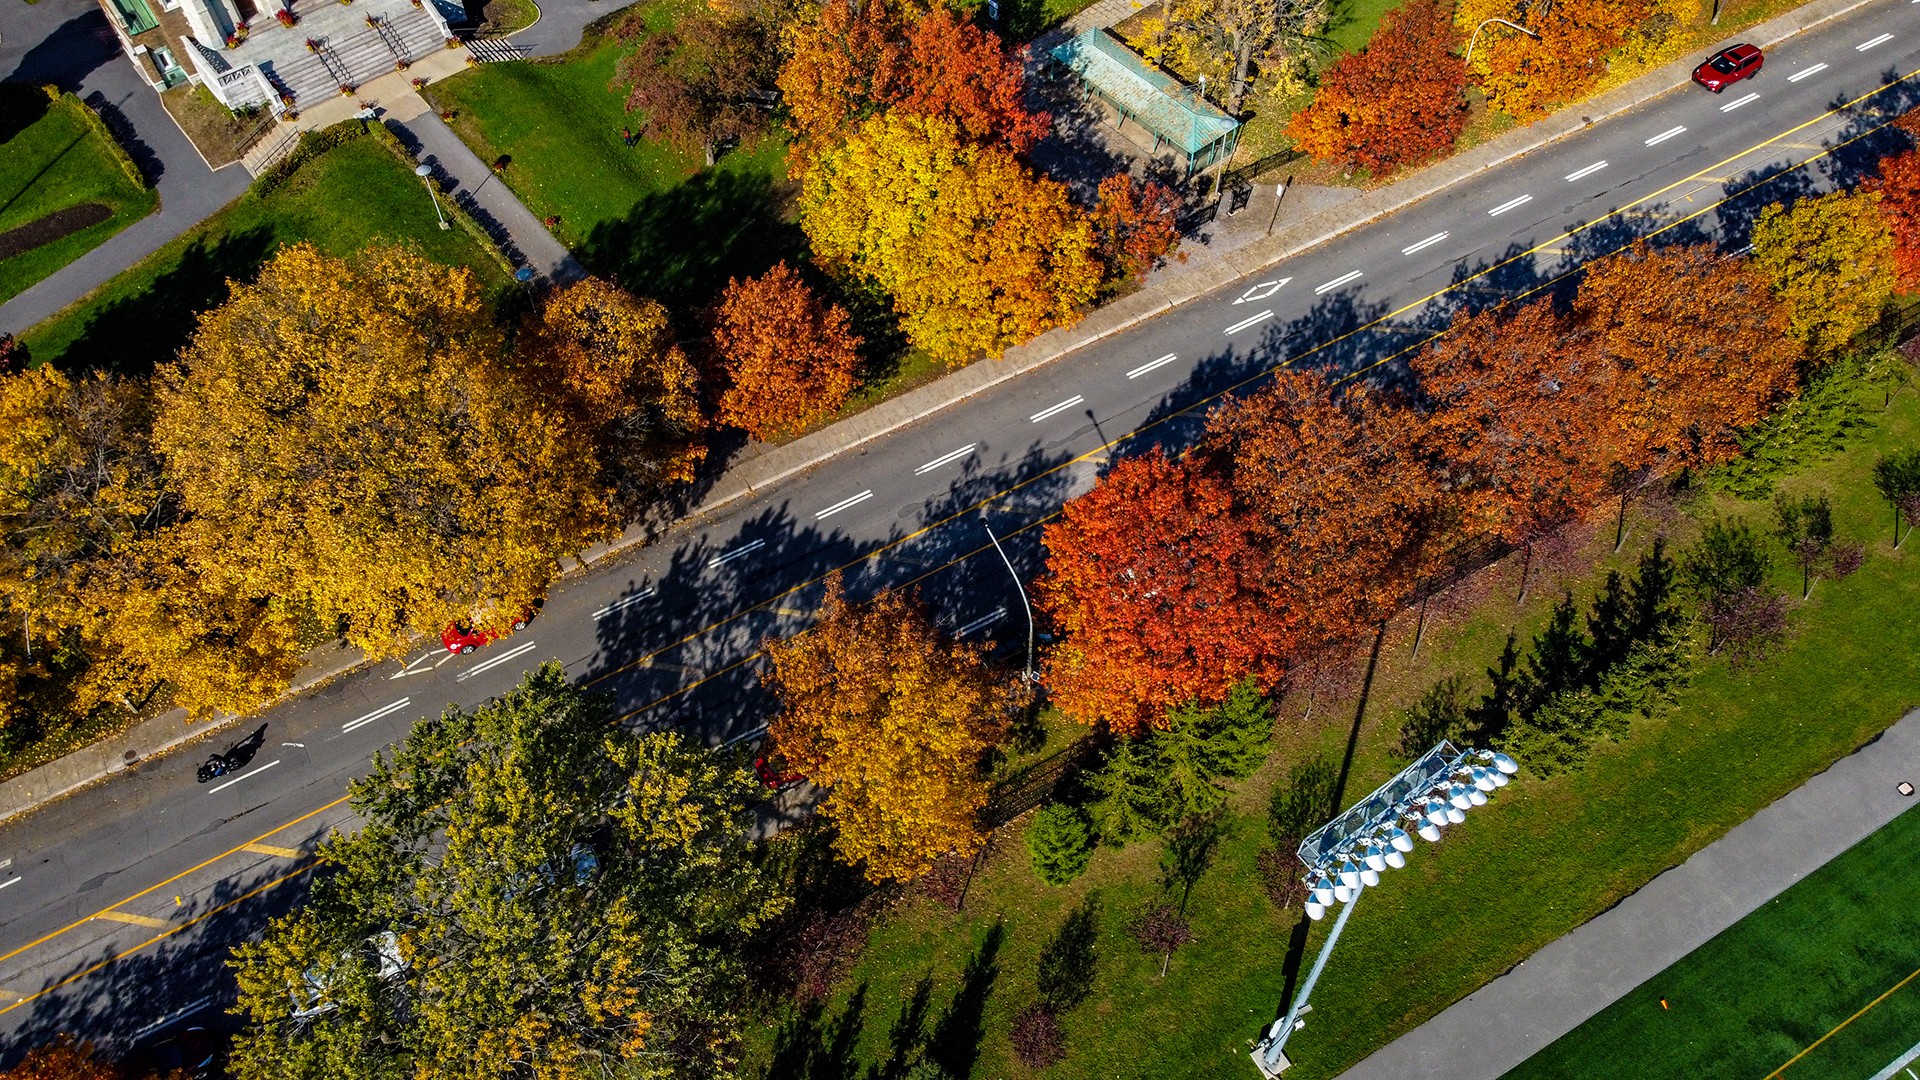 An aerial photograph of the Loyola campus, intersected by Sherbrooke Street West, in the autumn